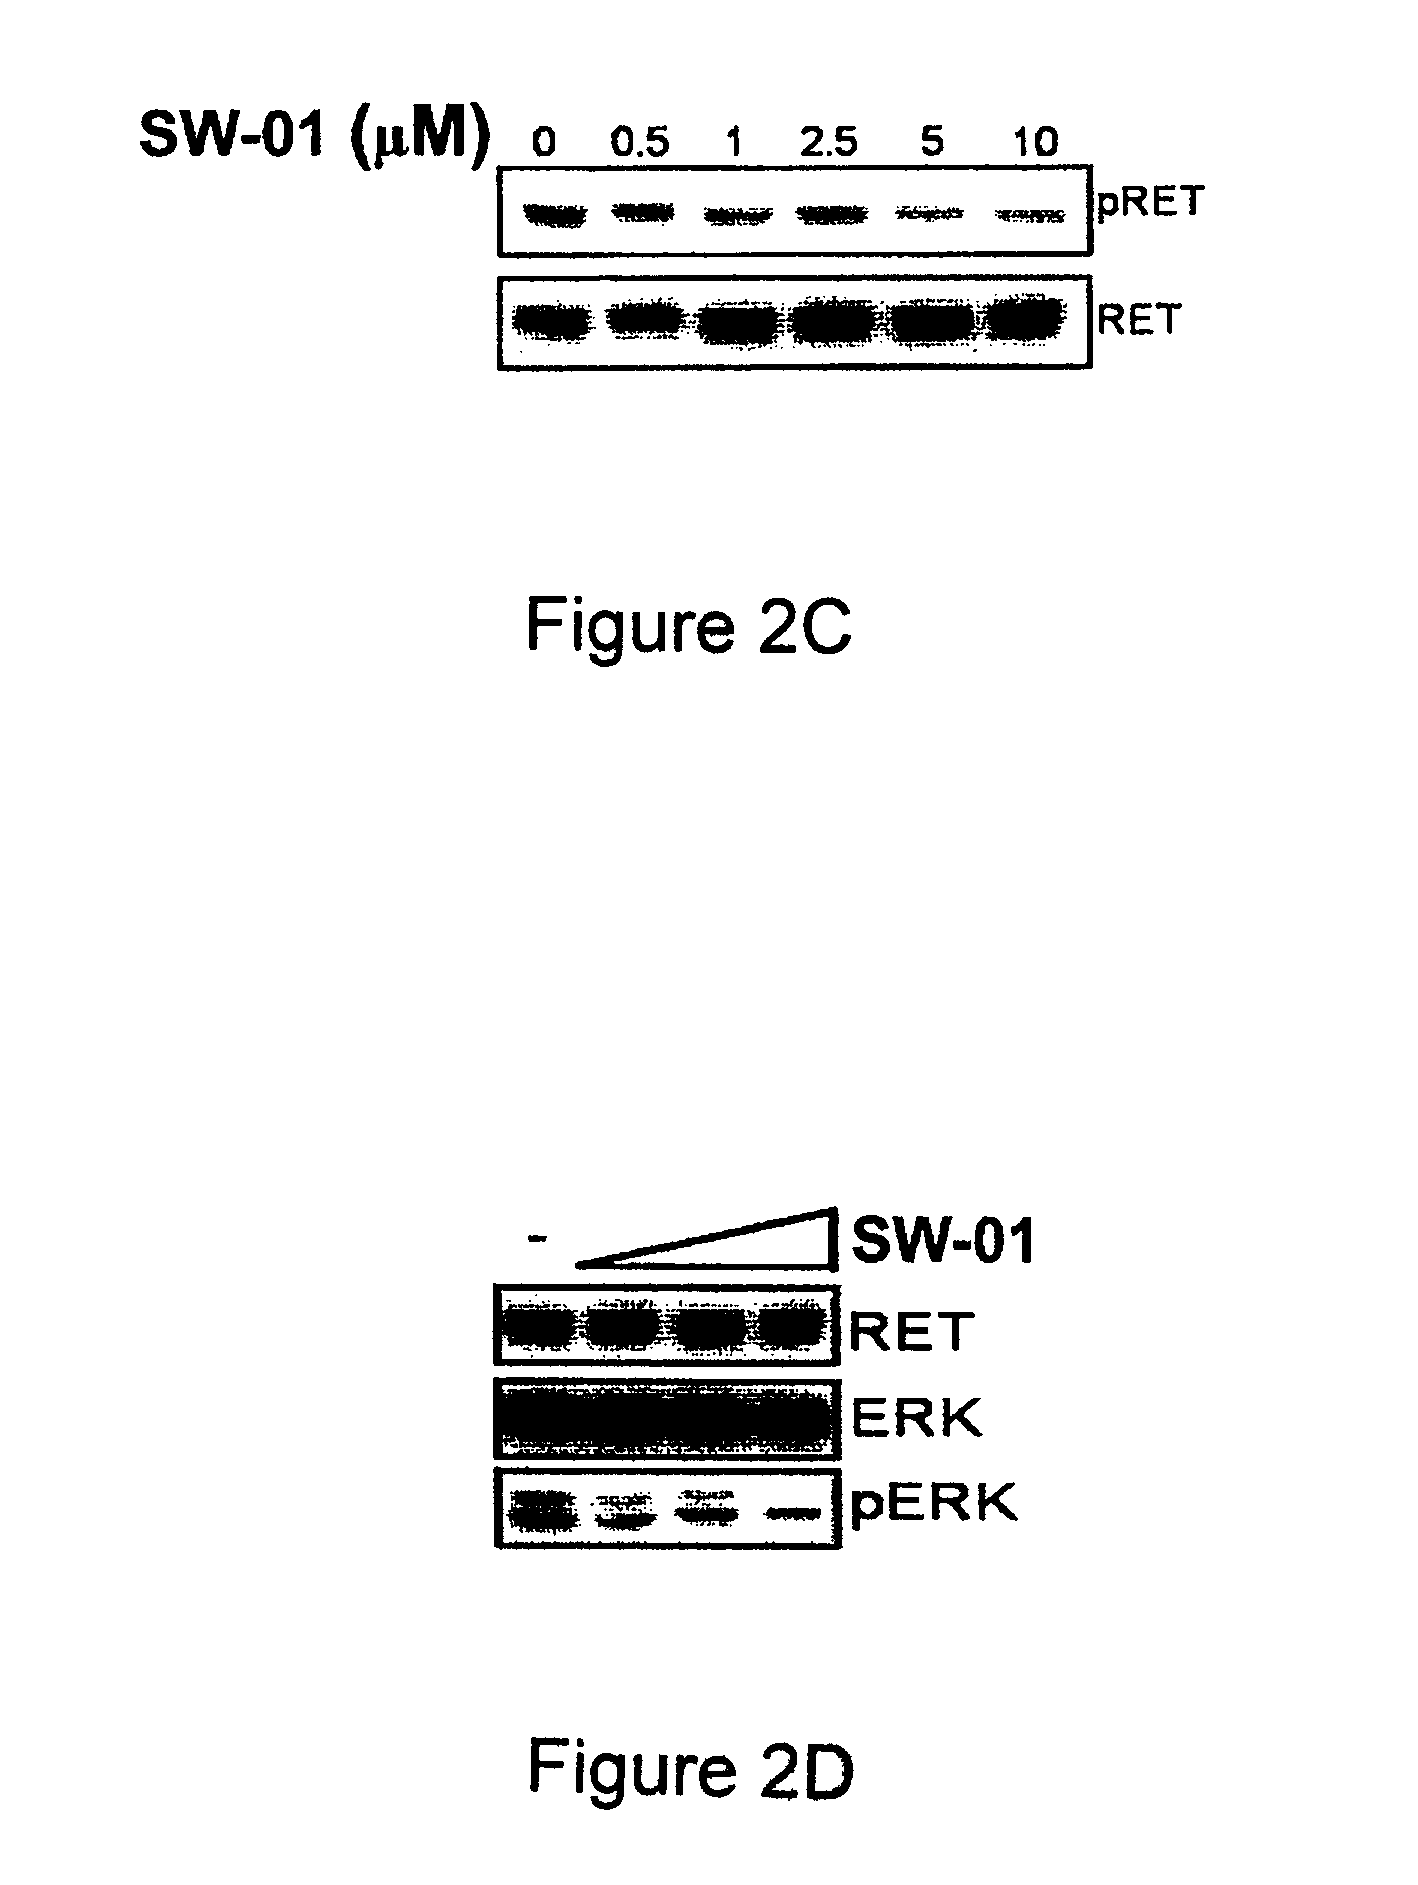 Pharmaceutical compositions comprising RET inhibitors and methods for the treatment of cancer